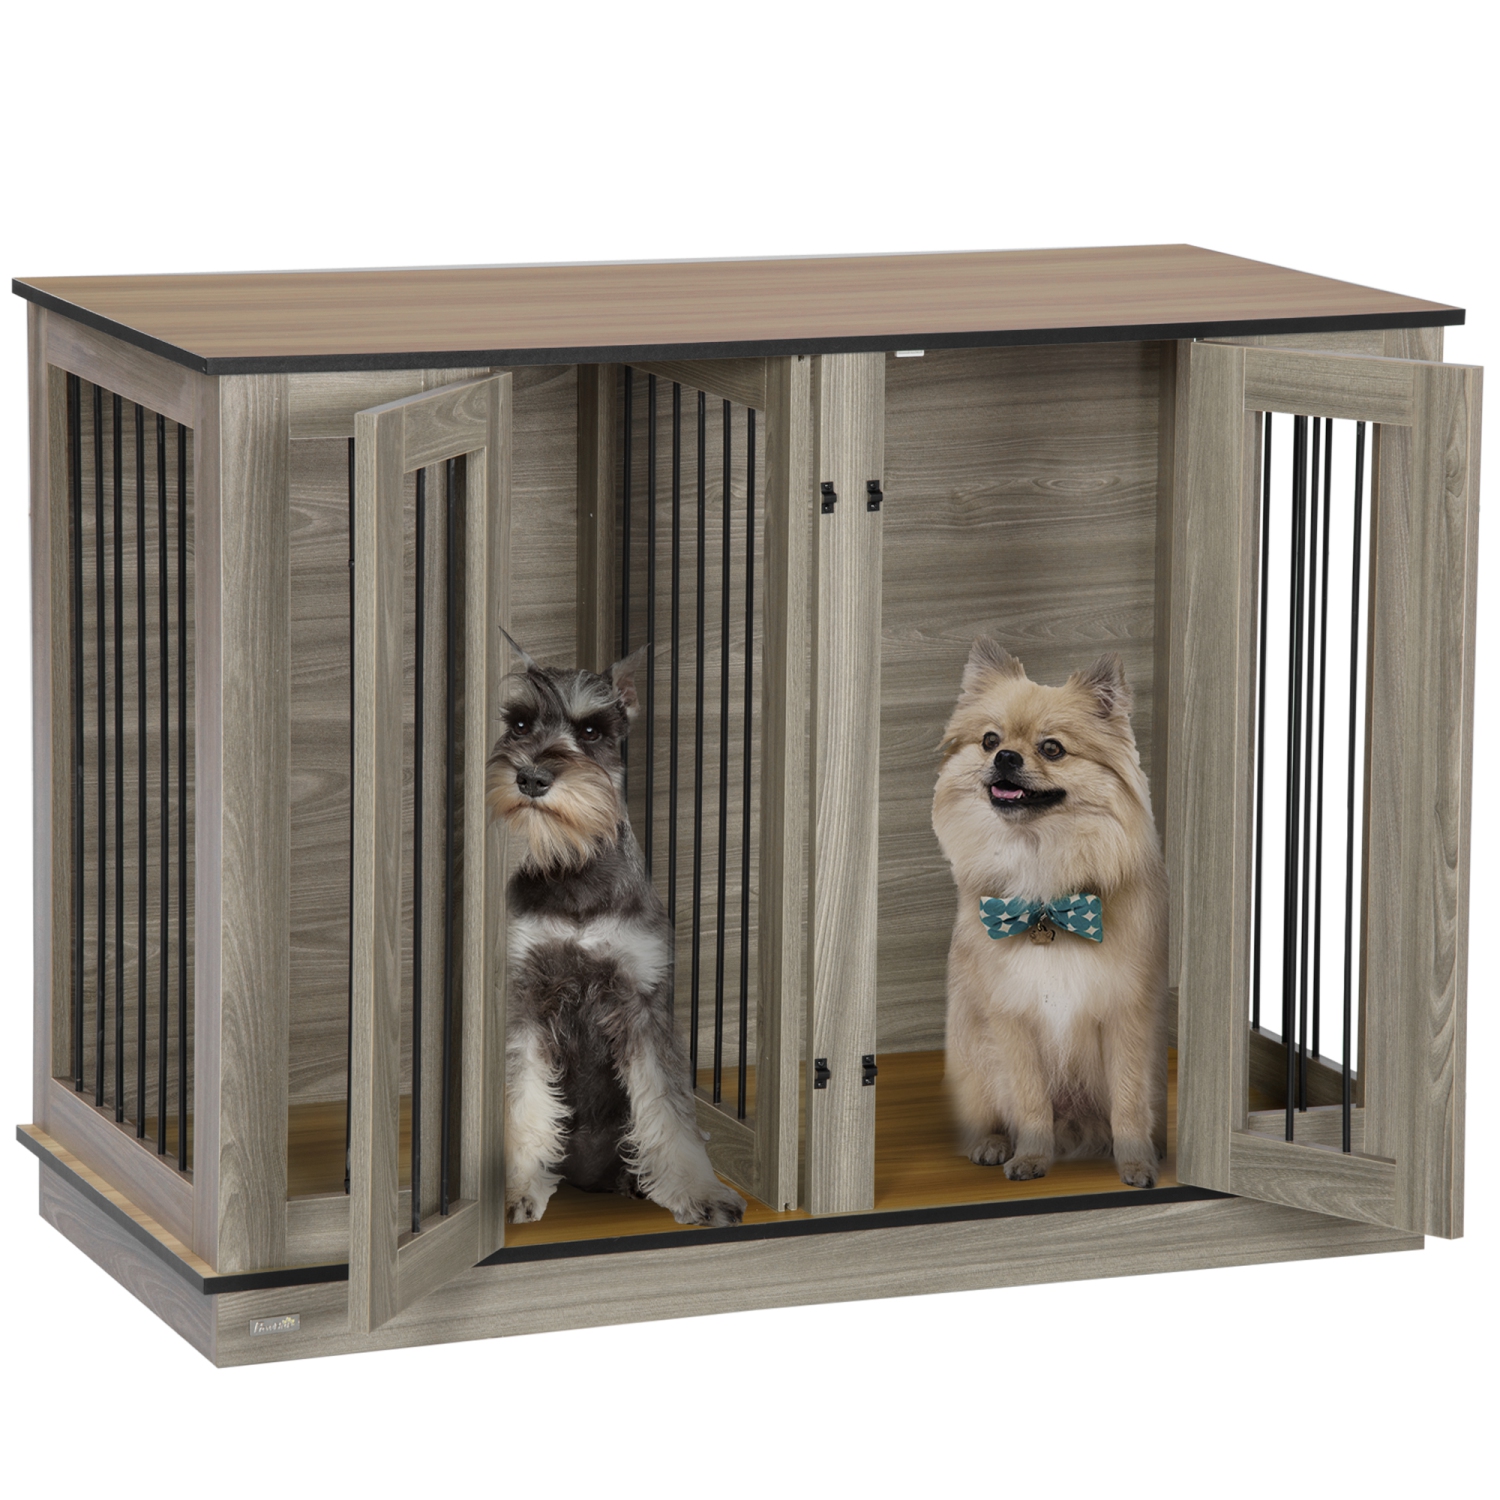 PawHut Dog Crate Furniture with Divider Panel, Dog Kennel End Table for Large Dogs, Decorative Pet House with Two Rooms Design, 47.25" x 23.5" x 34.75"